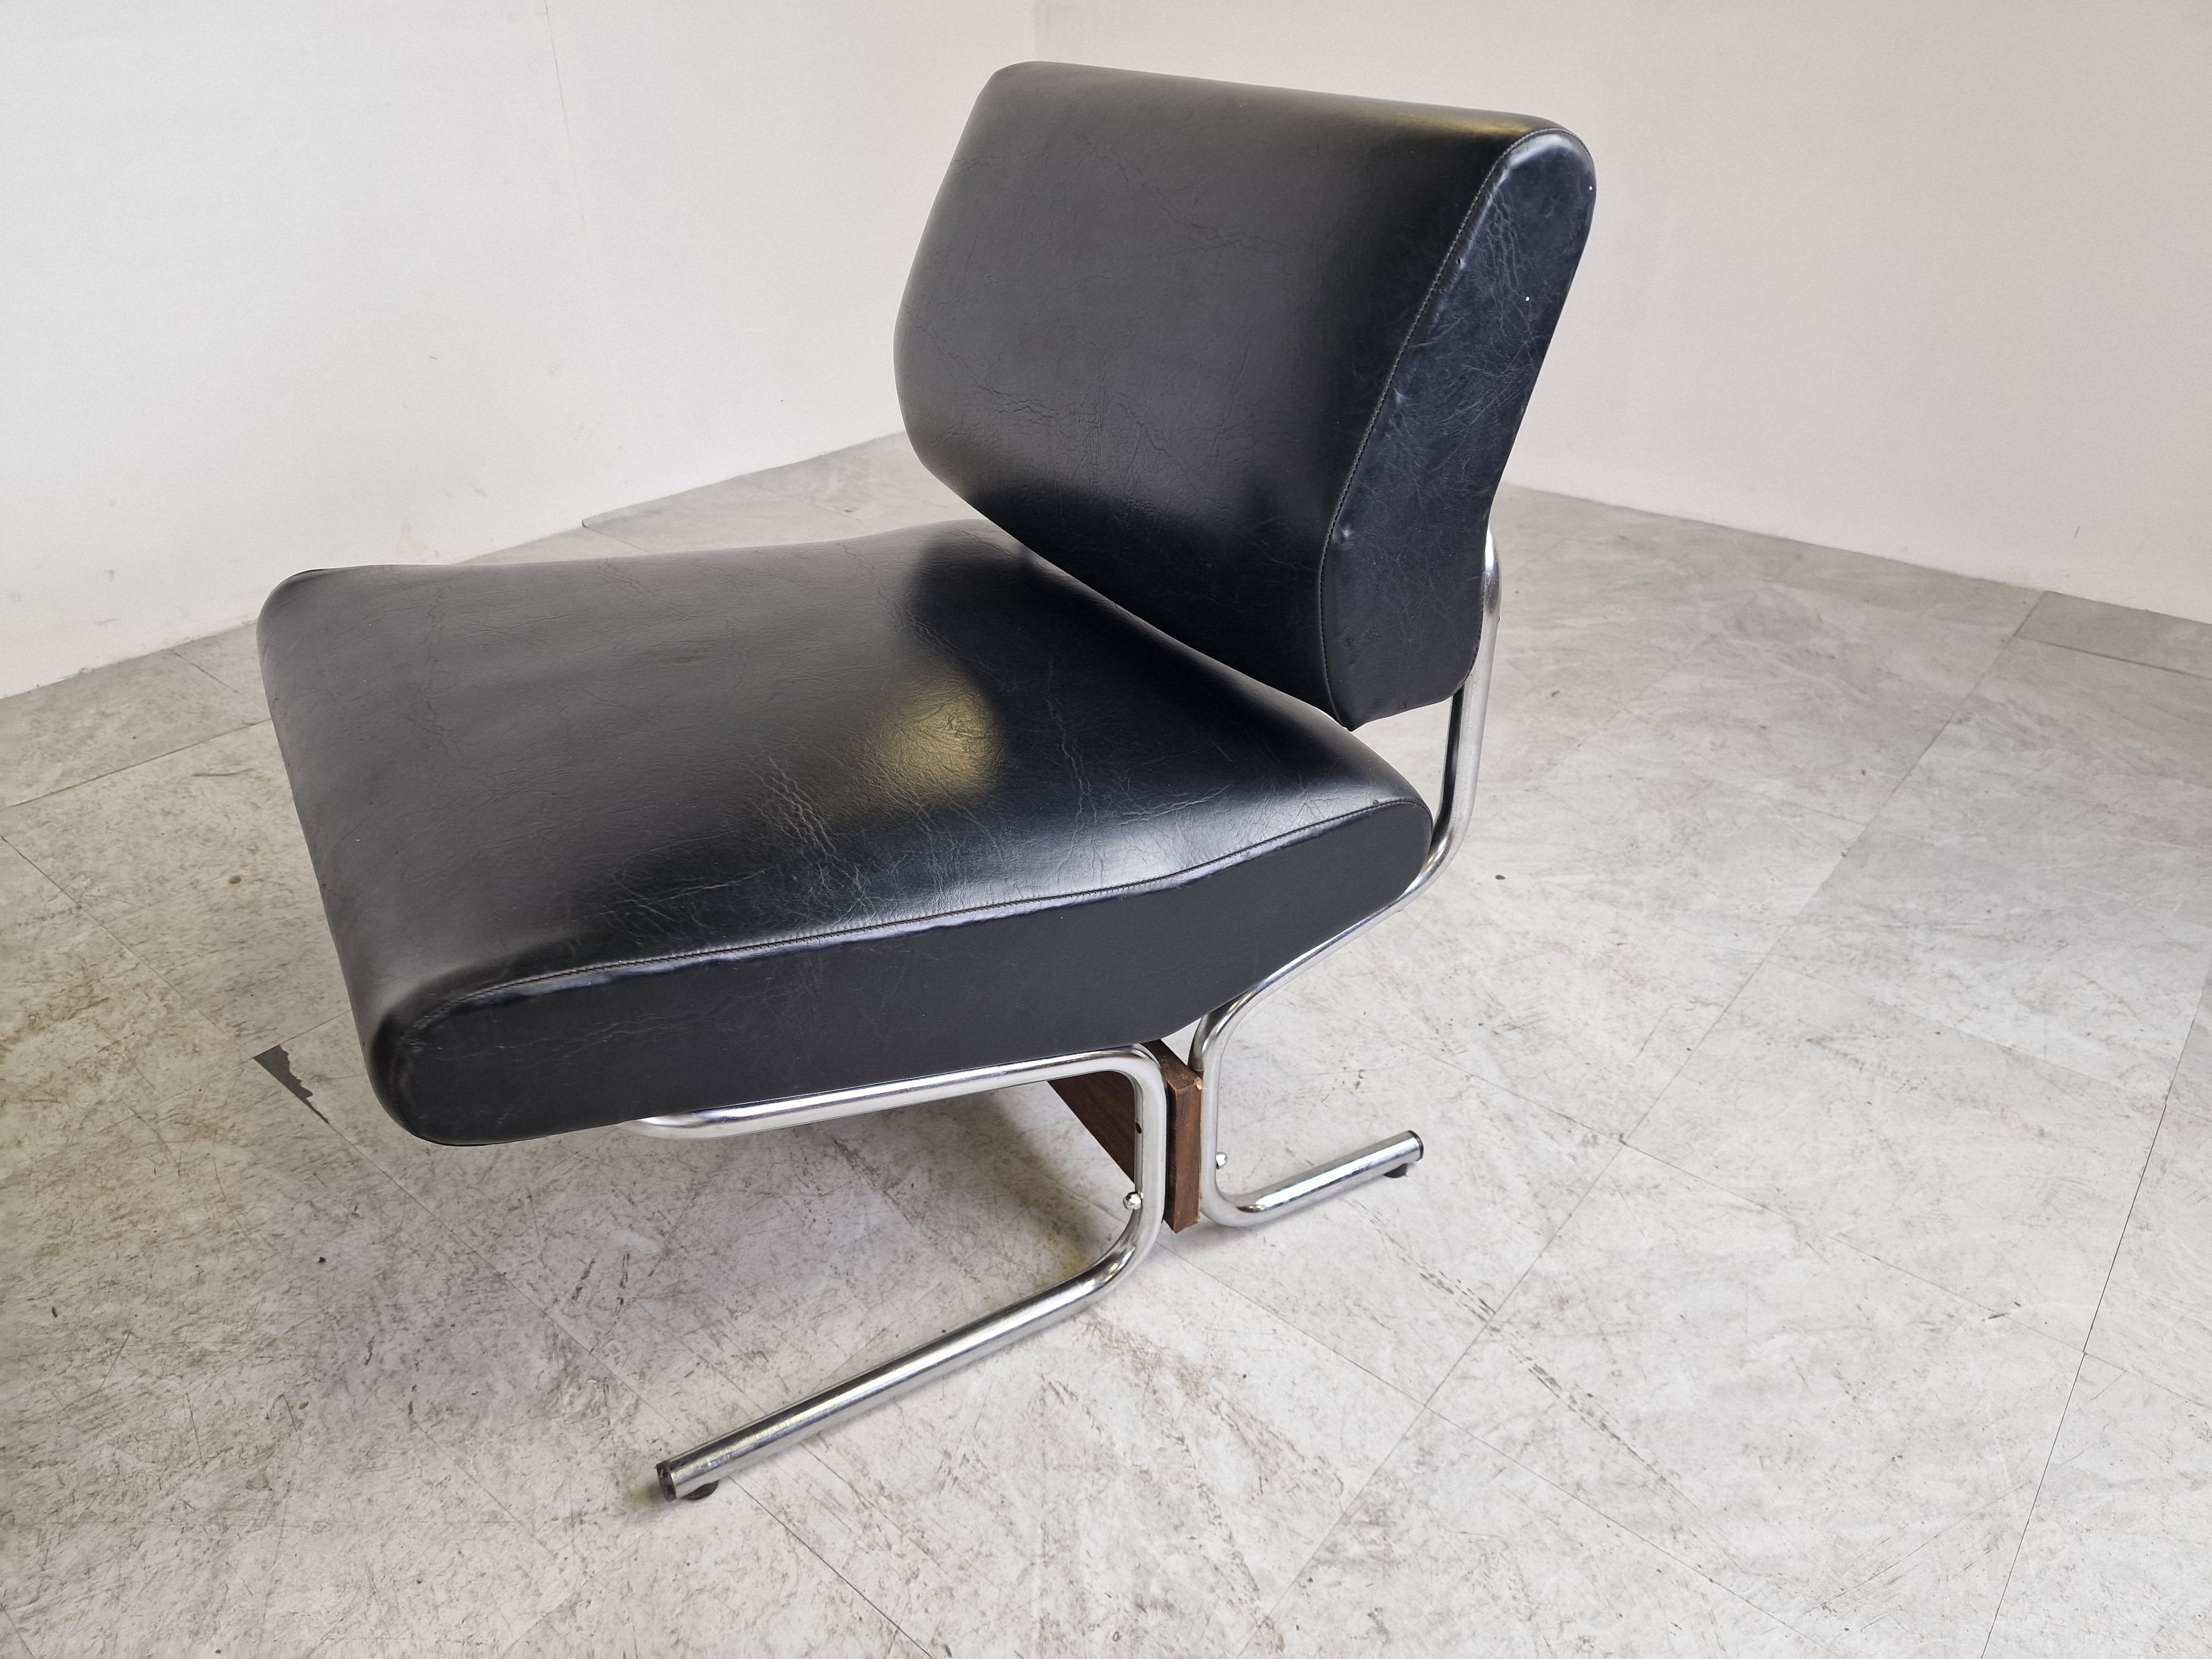 Vintage low chairs model 'caracas' designed by Pierre Guariche for Meurop.

The set consists of 4 identical chairs which can be placed as desired to create one big bench or another setup

The chairs are upholstered in the original black skai and